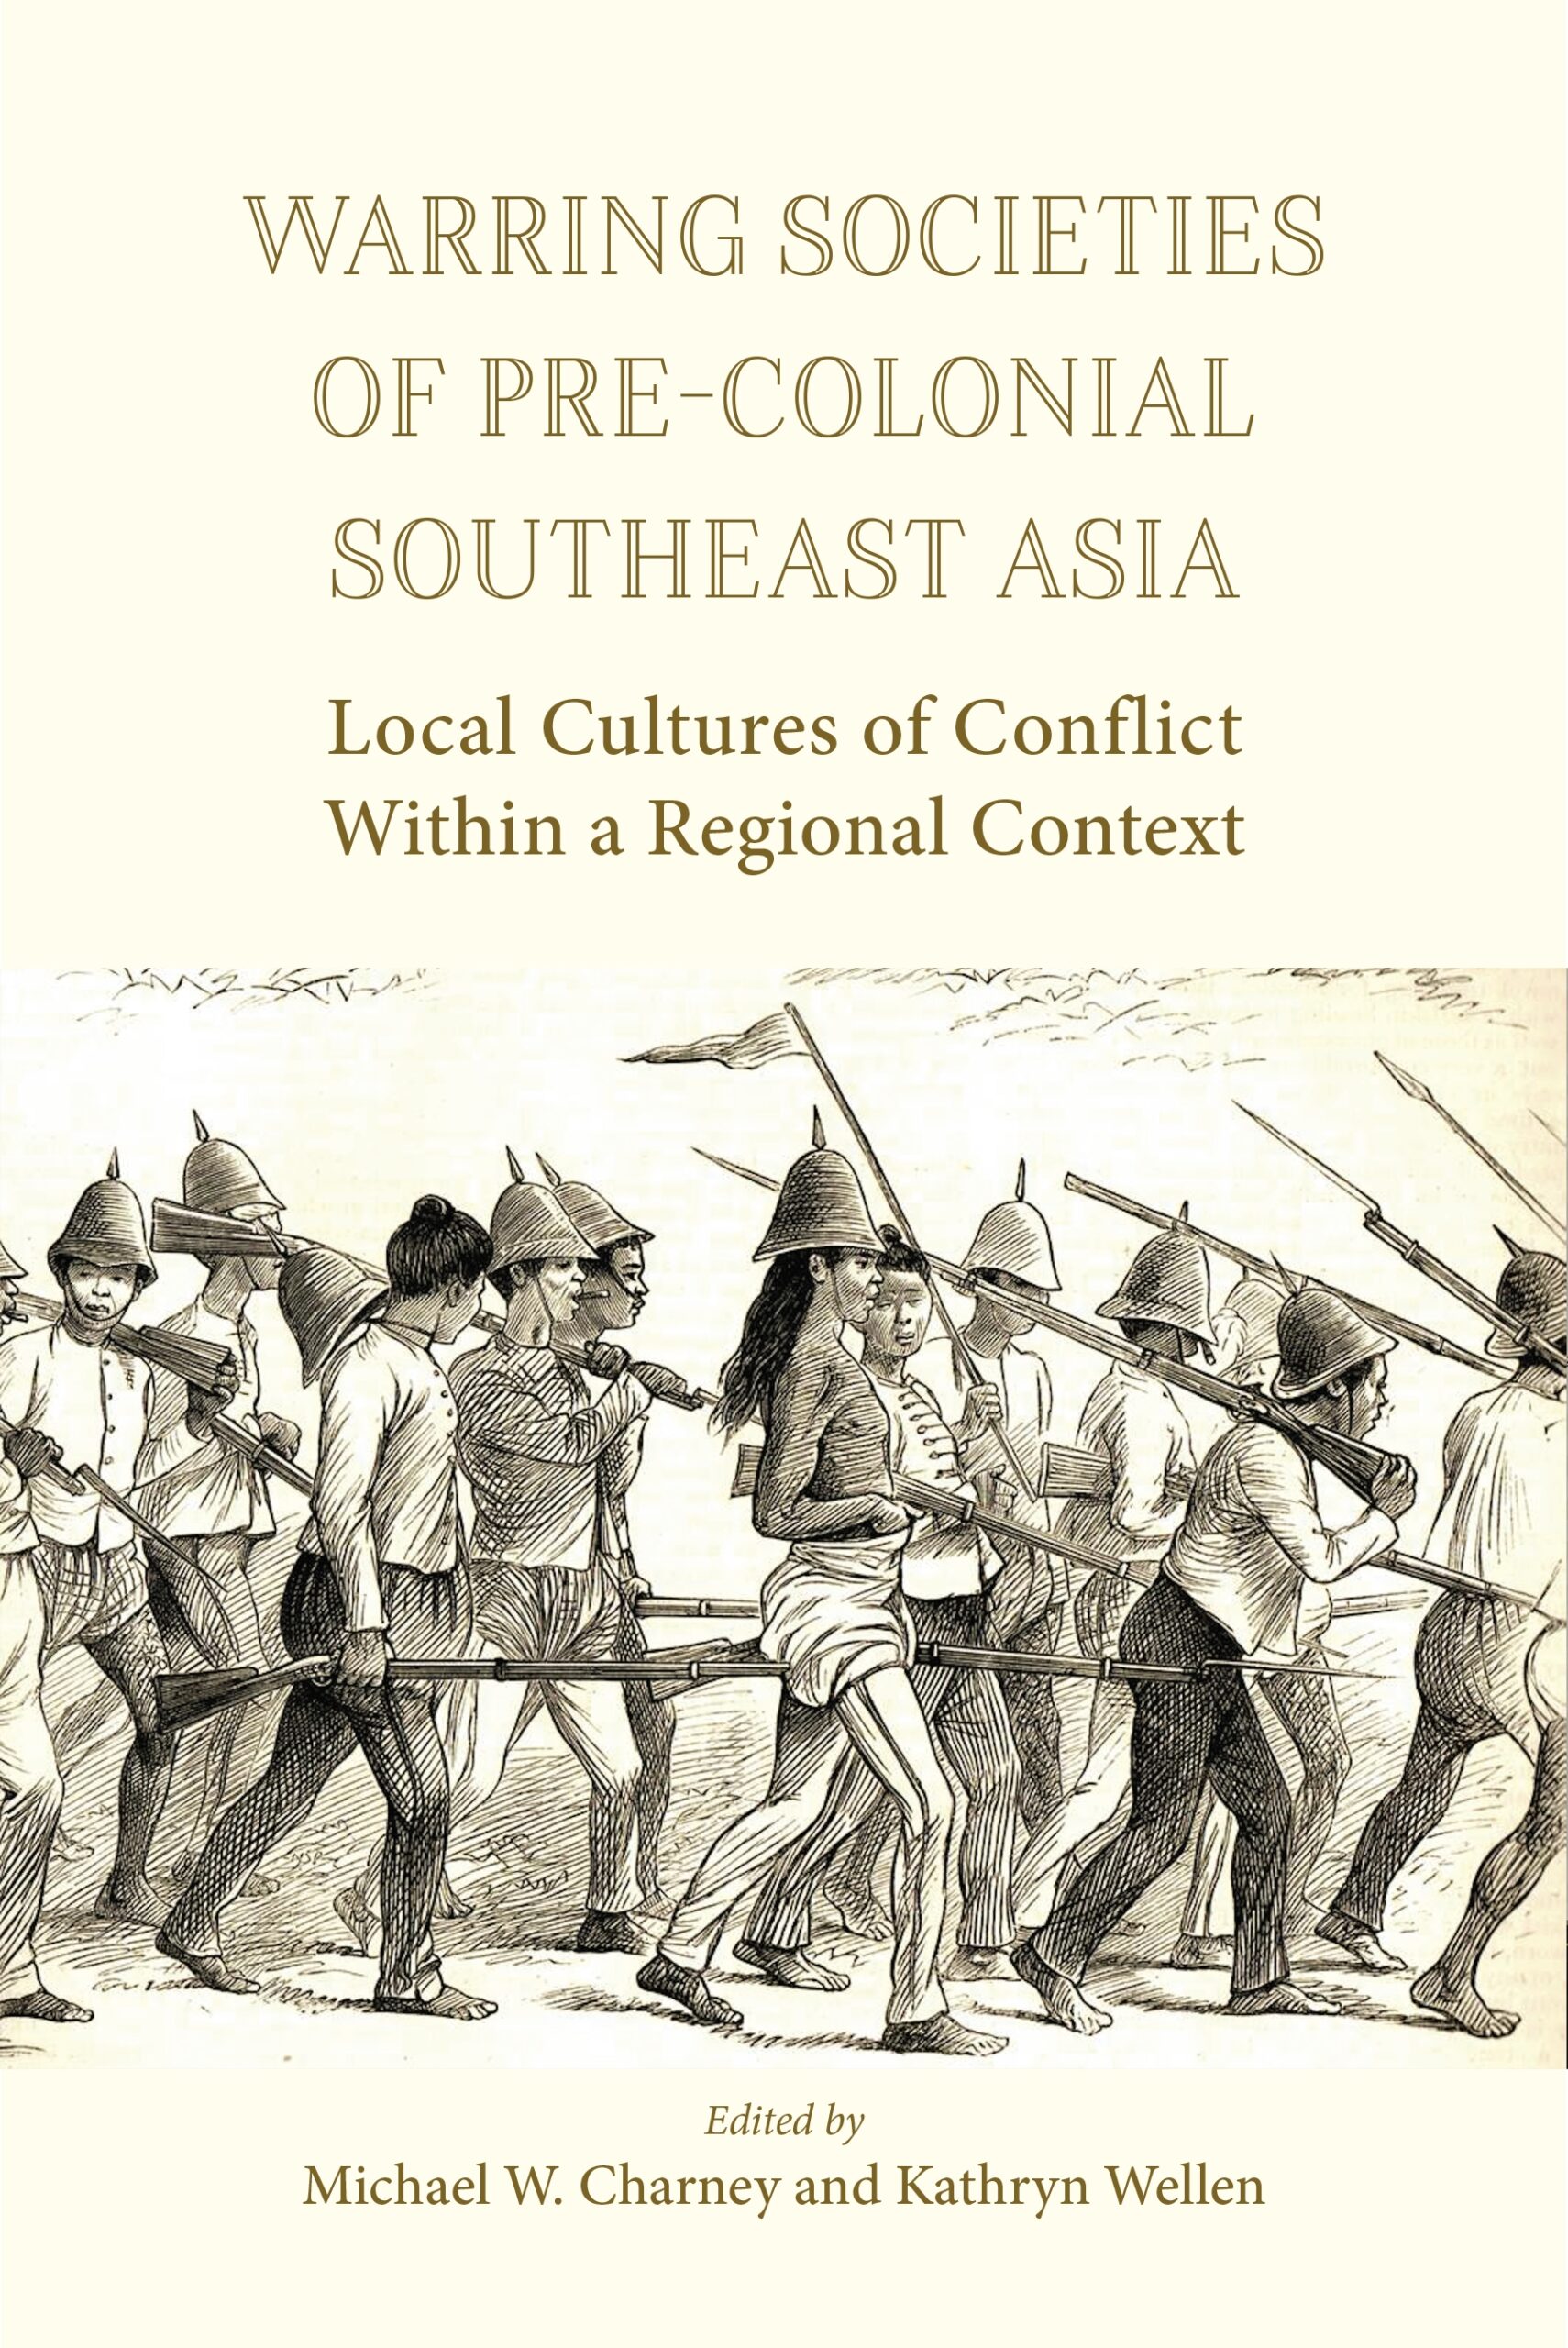 Pre-colonial　Warring　Press　Within　Southeast　Regional　Context　Cultures　Conflict　Societies　Asia:　of　UH　of　–　Local　a